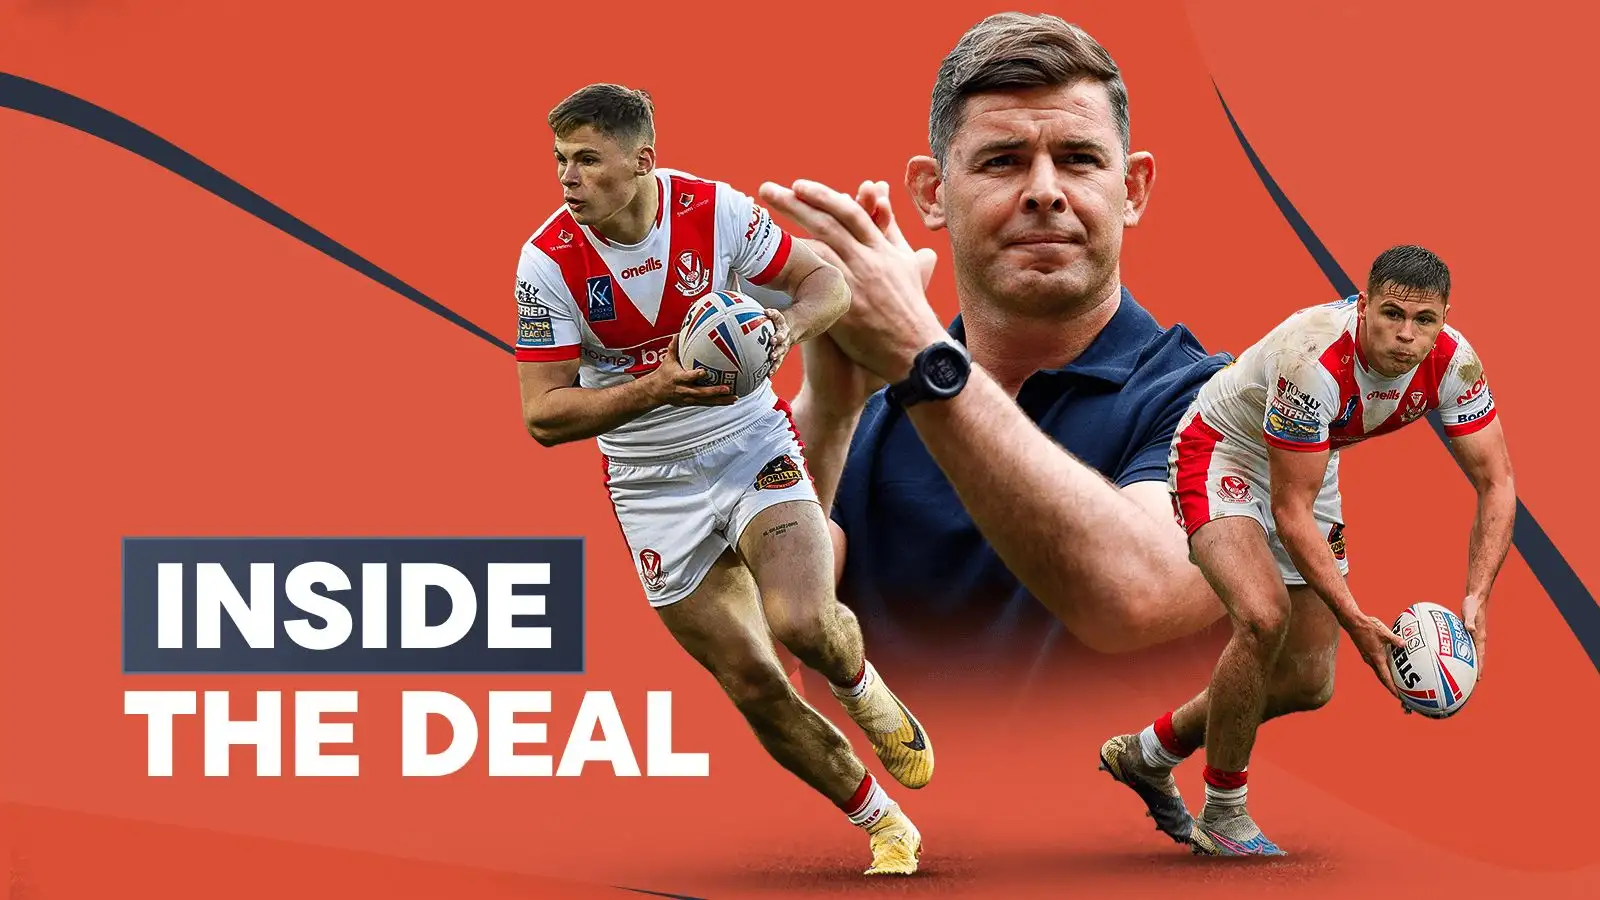 Inside the Deal: How St Helens fended off the NRL to secure Jack Welsby long-term